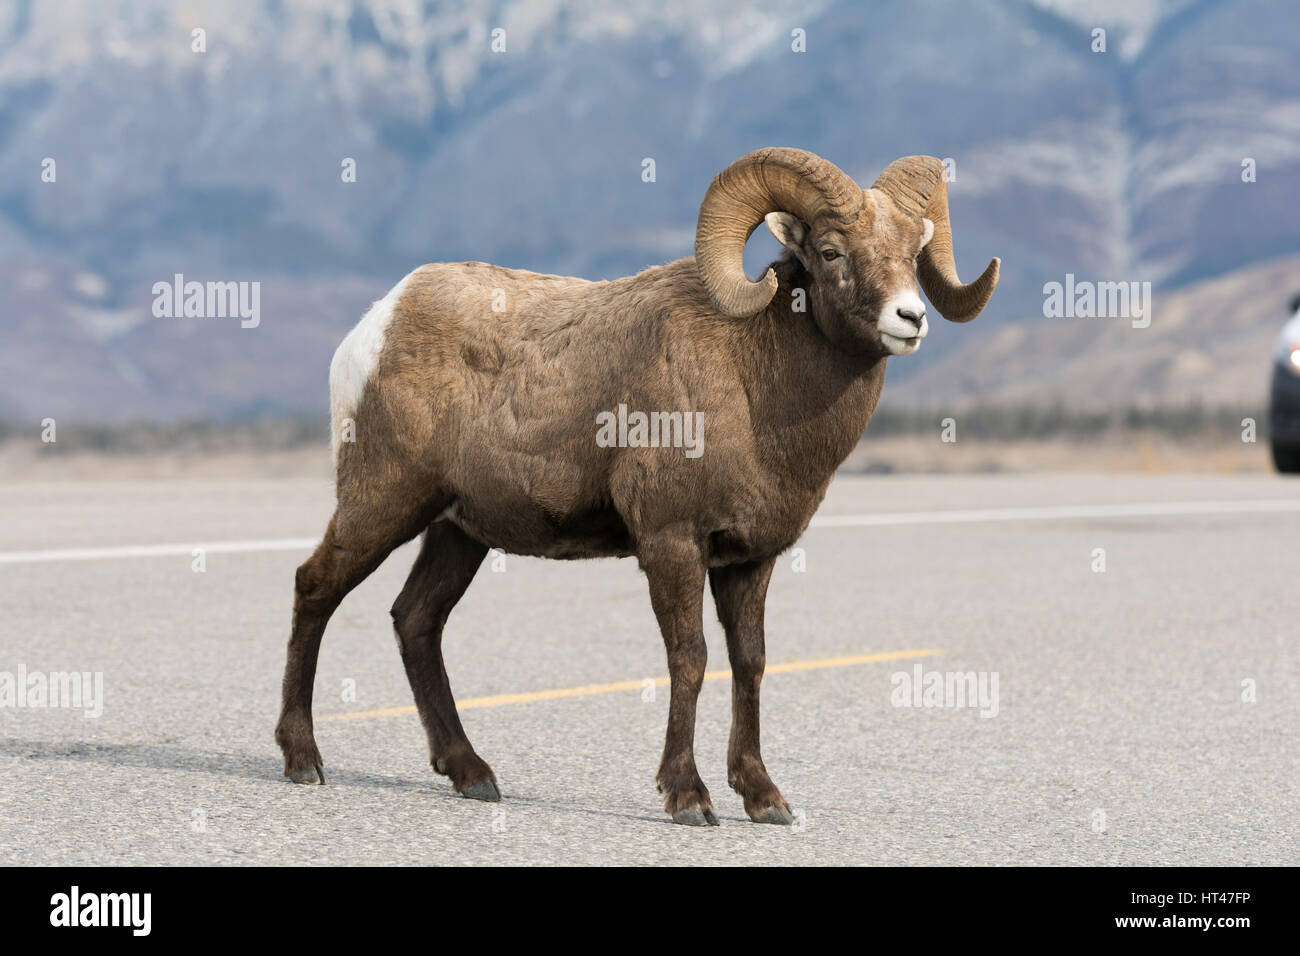 Ram sheep on the road Stock Photo